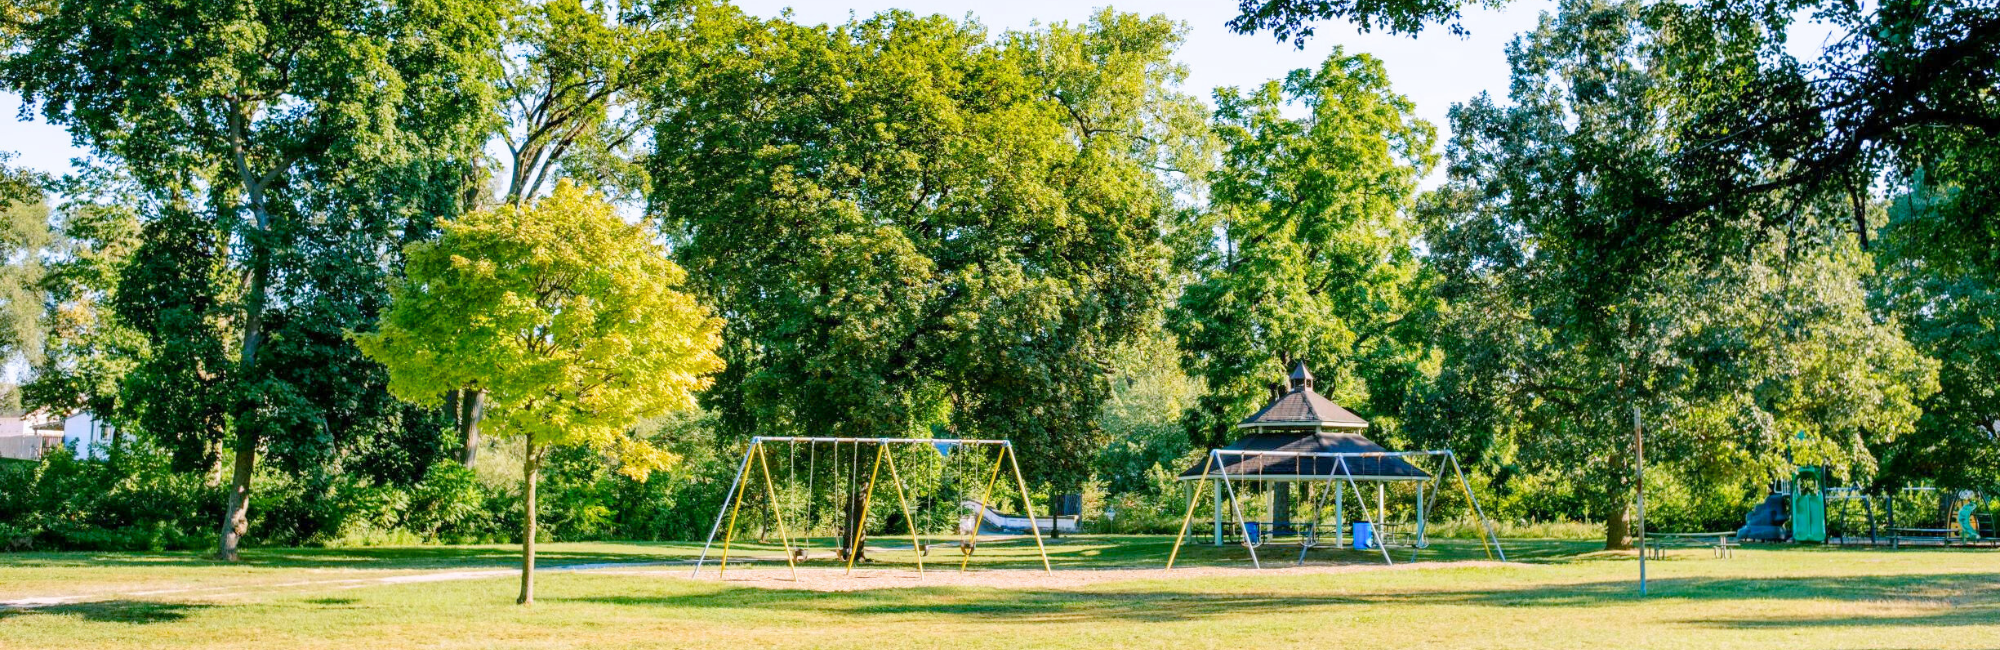 park with open greenspace, a playground in the distance and trees